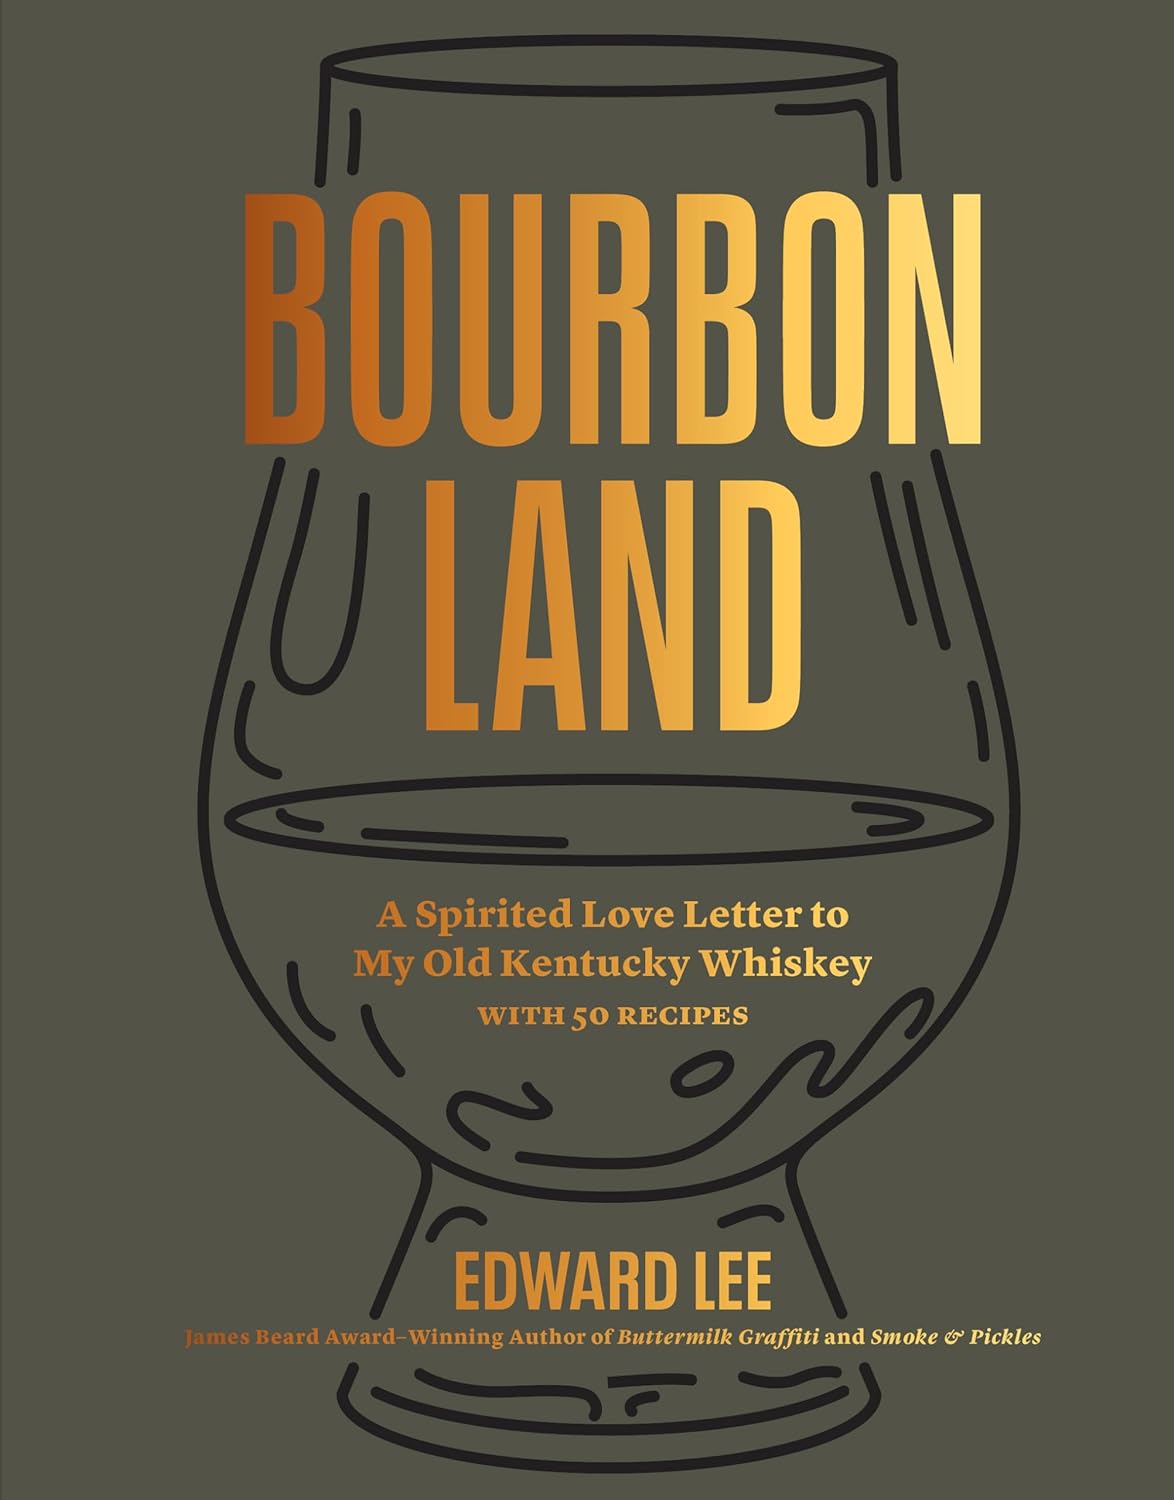 Bourbon Land: A Spirited Love Letter to My Old Kentucky Whiskey, with 50 recipes (Edward Lee)